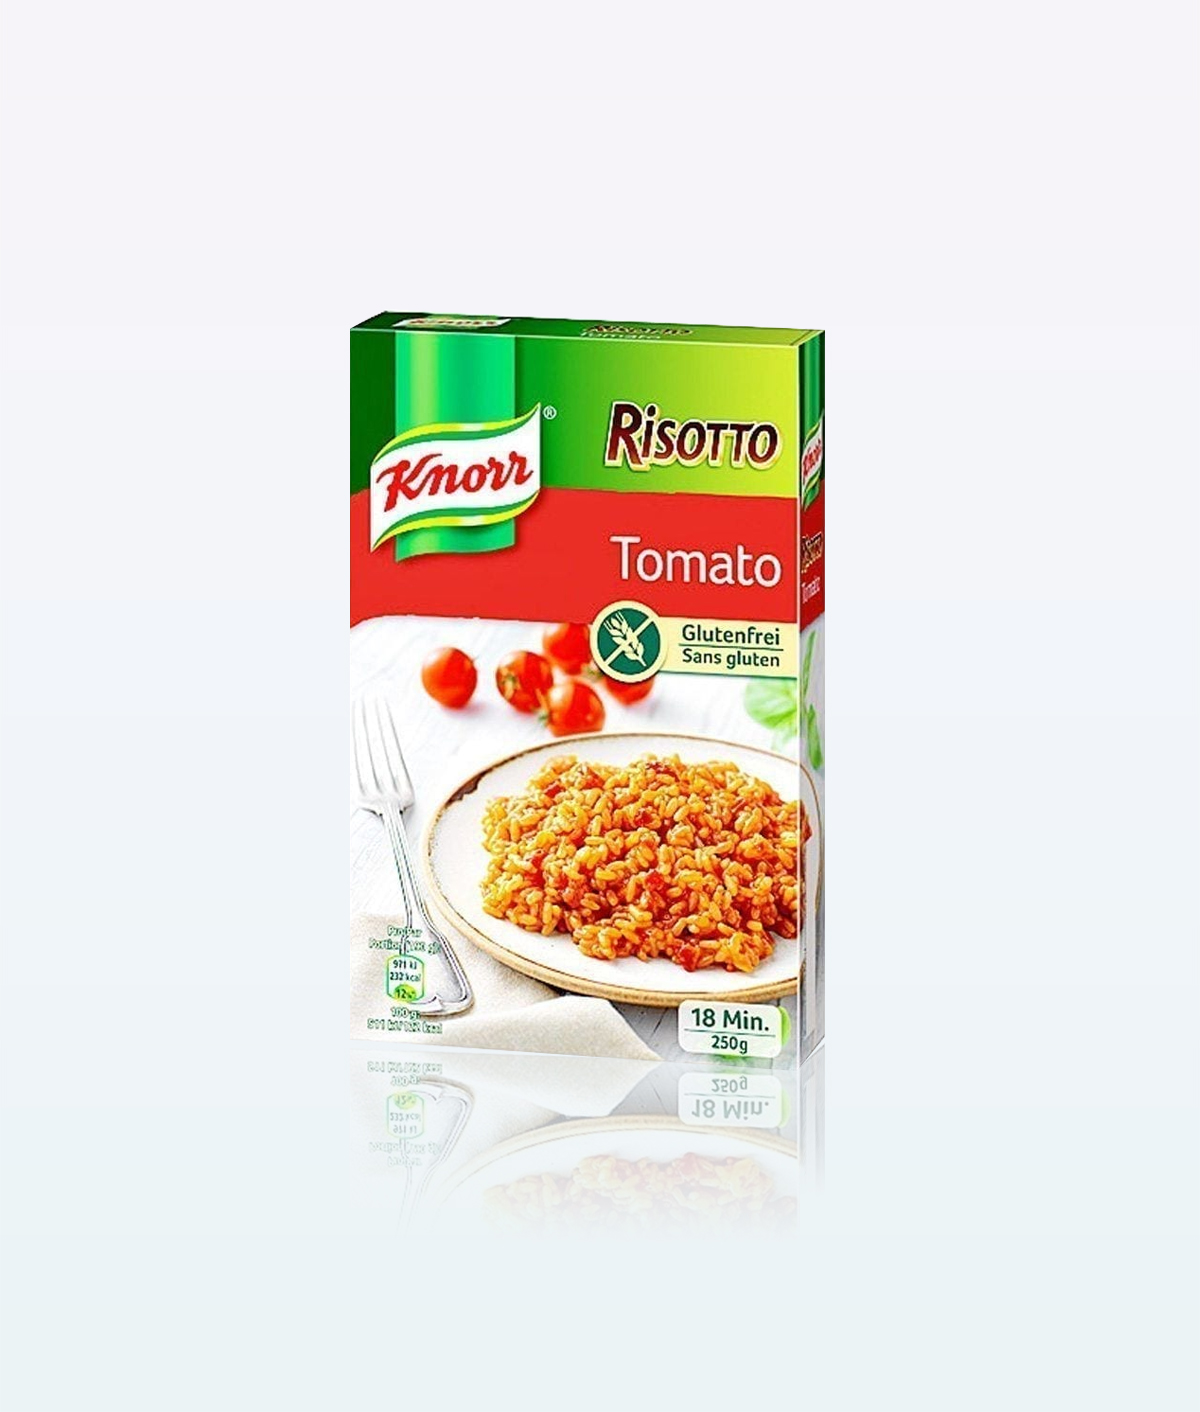 Knorr Risotto Tomate 250g